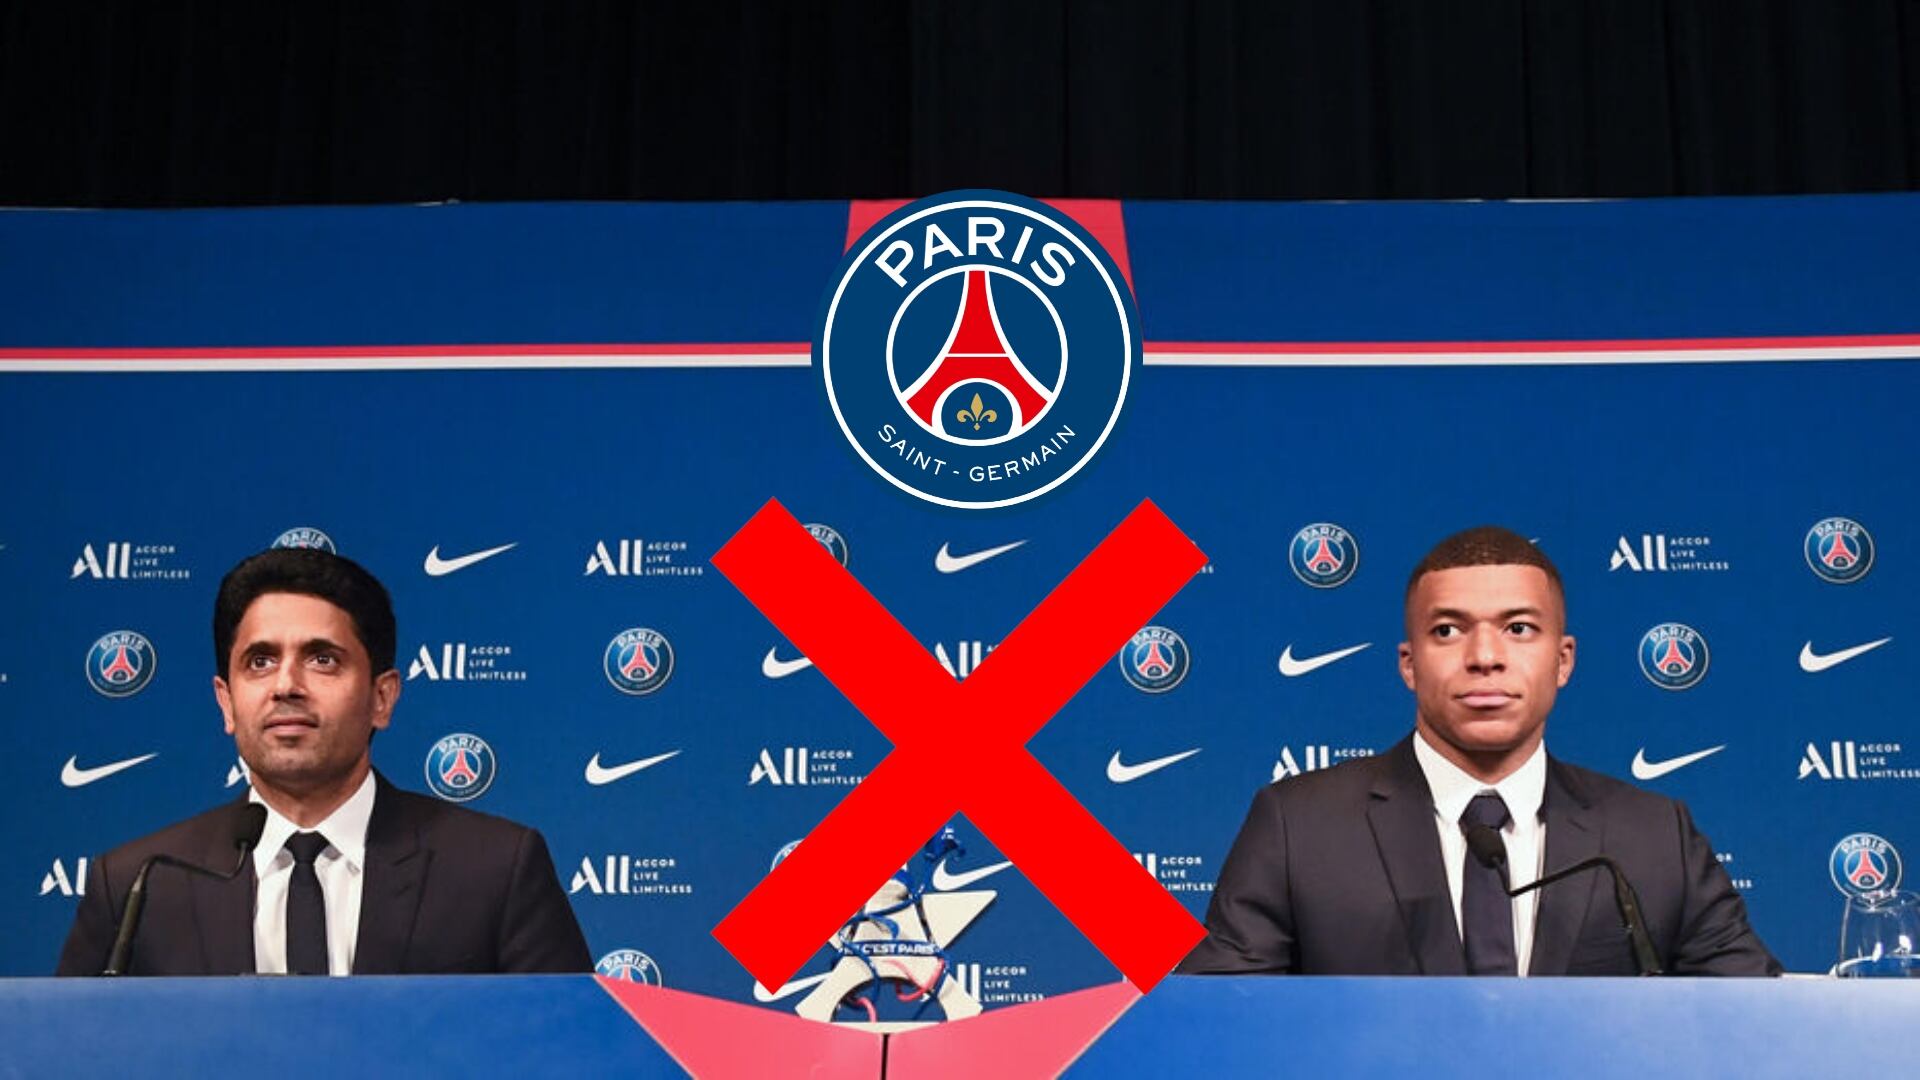 Not everything was smiles, Mbappé and Nasser Al Khelaifi would have fought before Mbappé's last PSG game for this reason